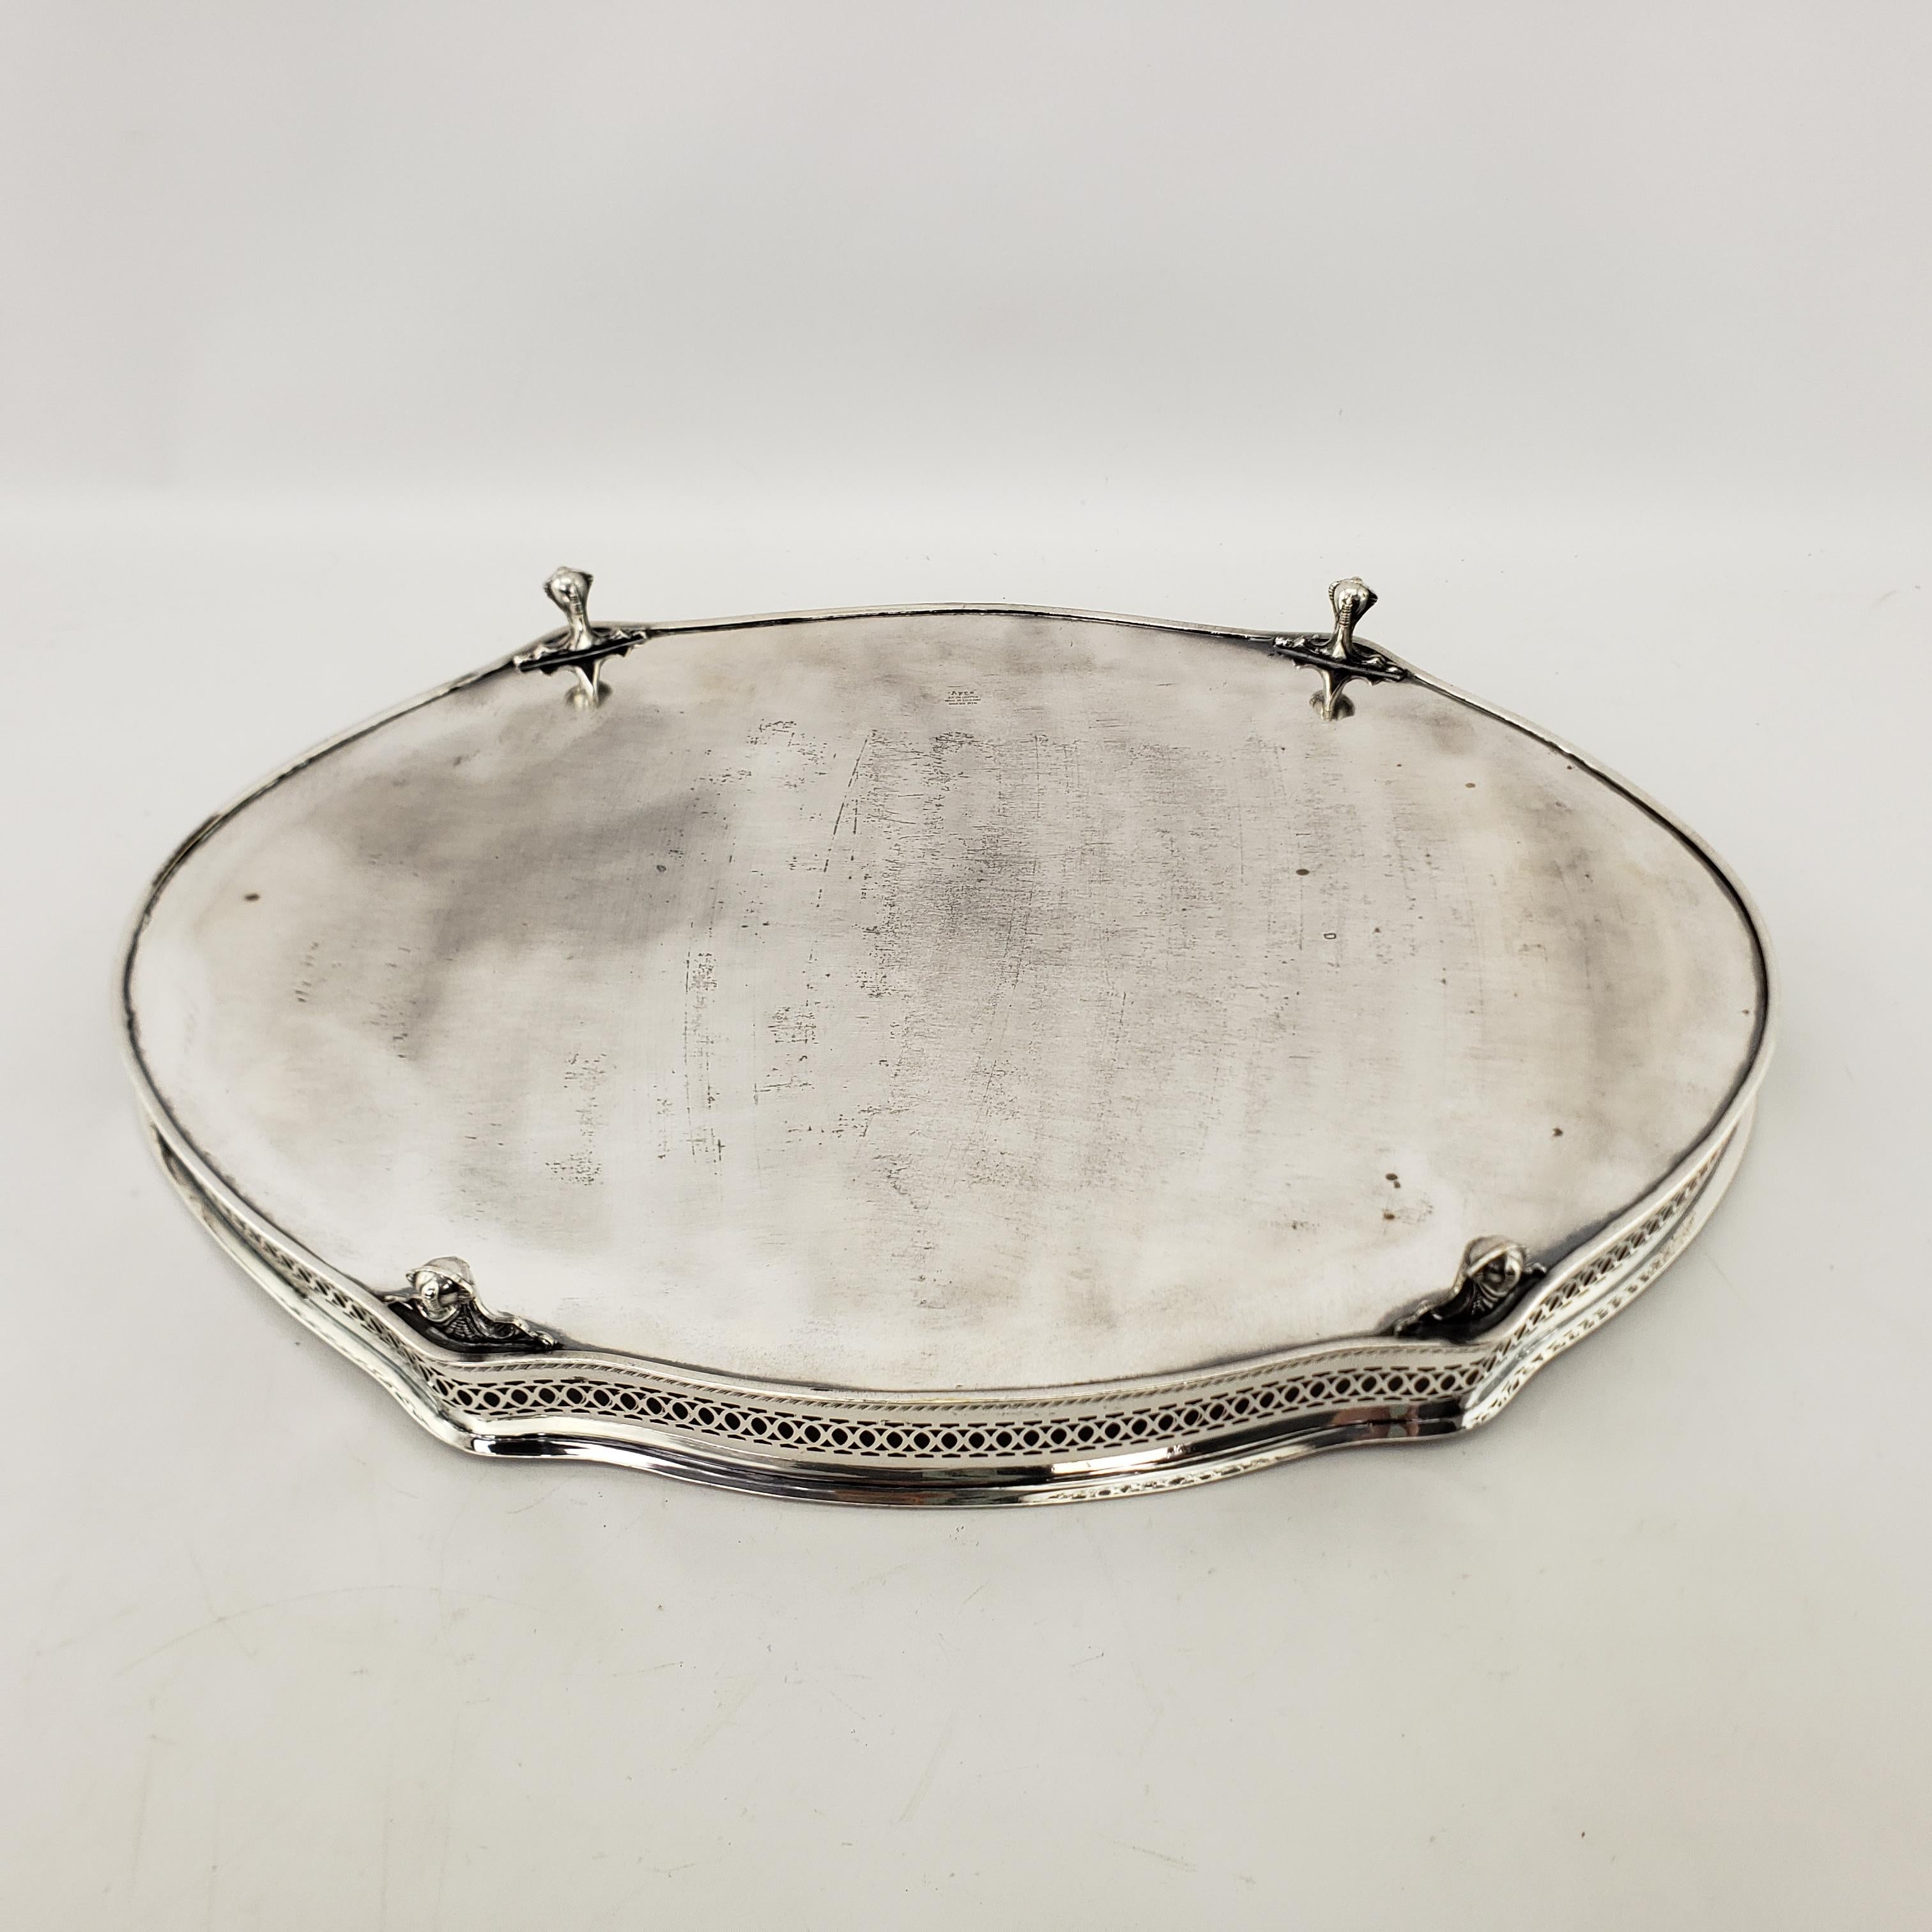 Antique Silver Plated Footed Gallery Serving Tray with Ornate Floral Engraving 3